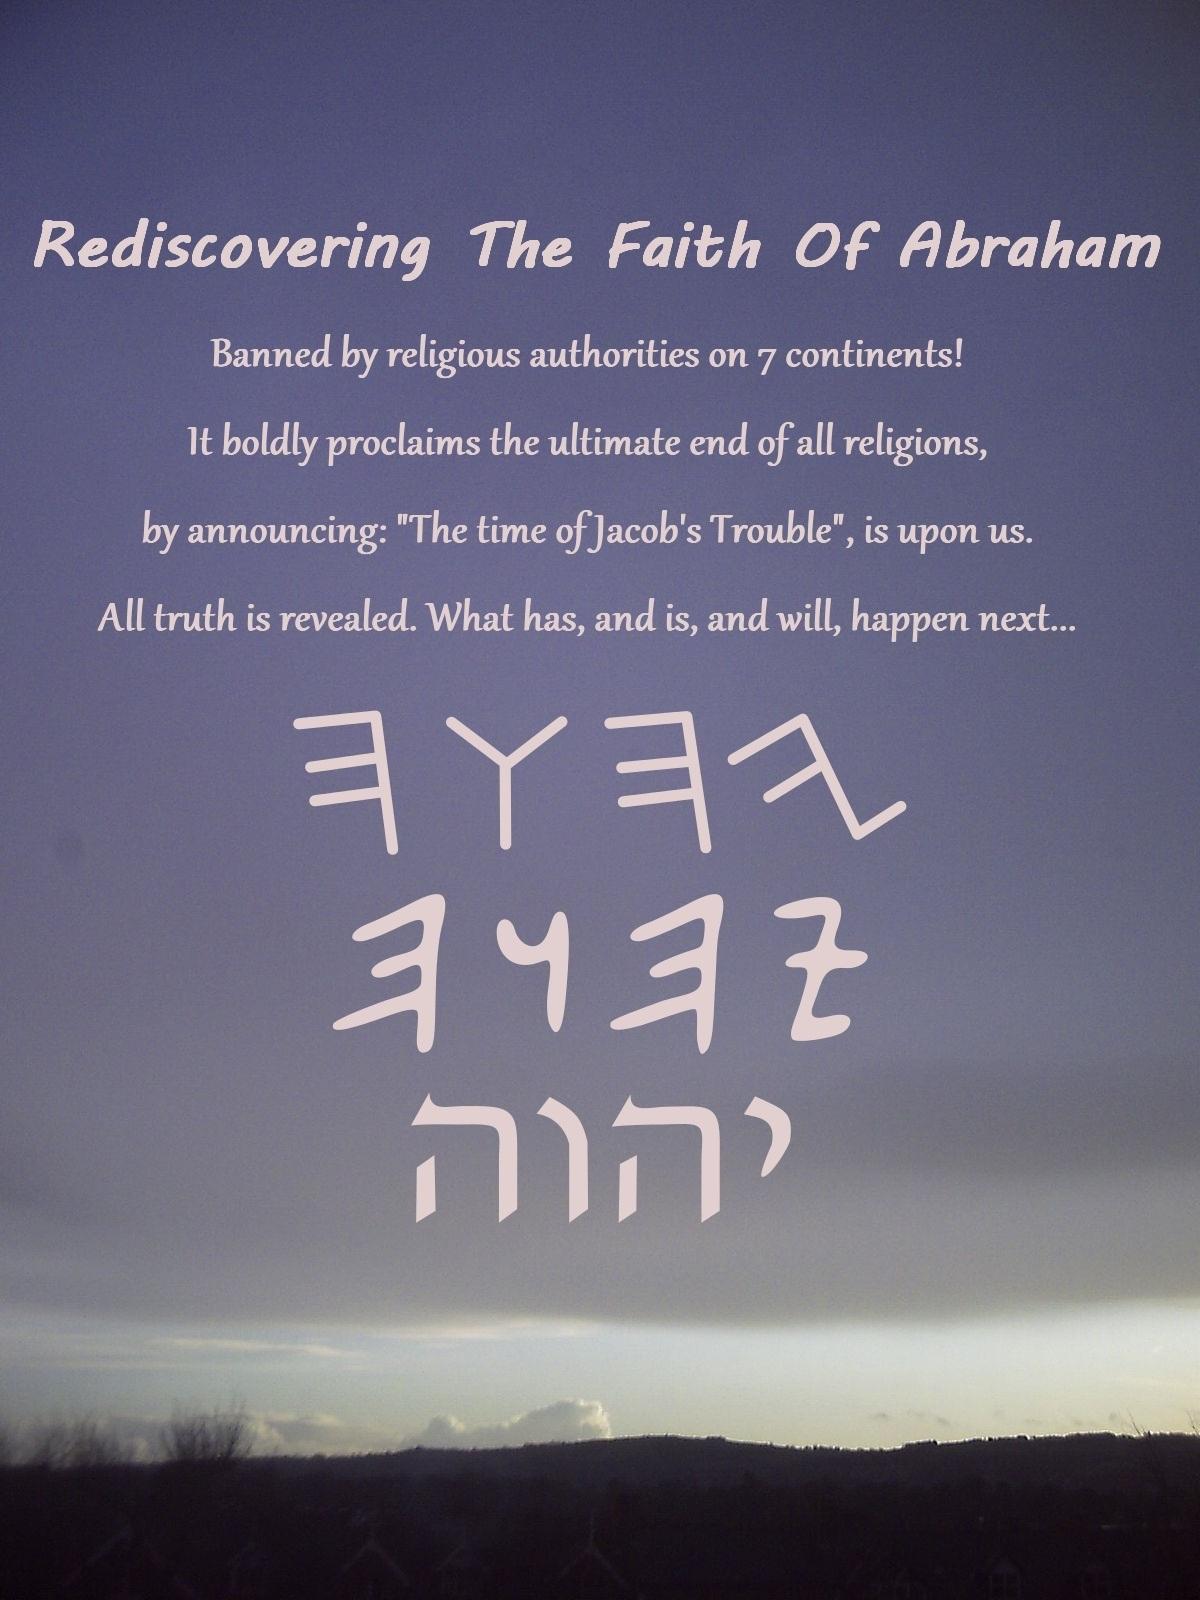 Rediscovering The Faith Of Abraham book cover.